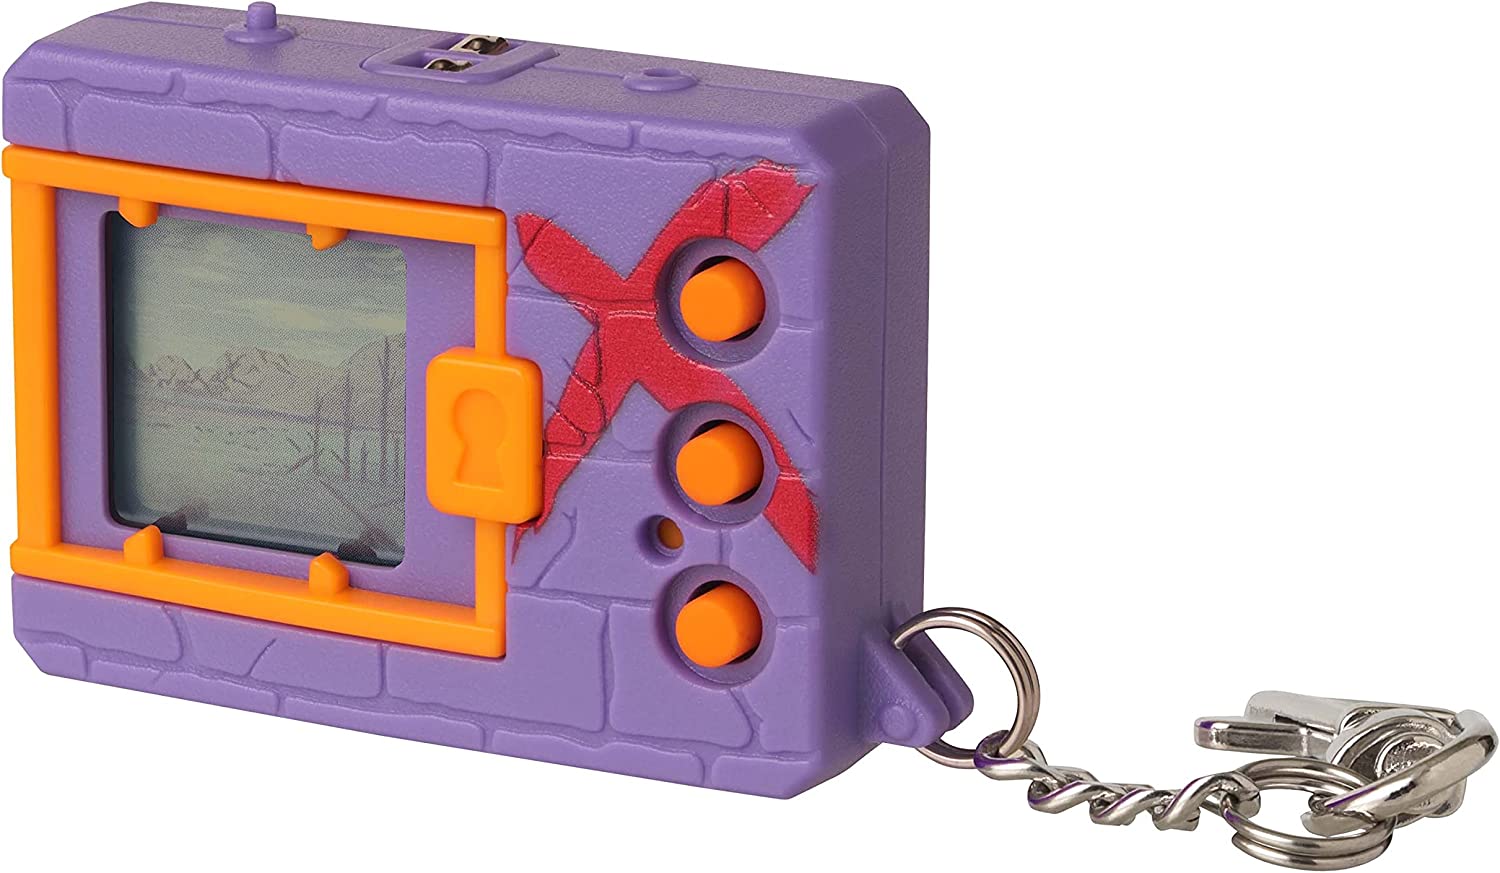 Digimon X (Purple & Red) image count 2